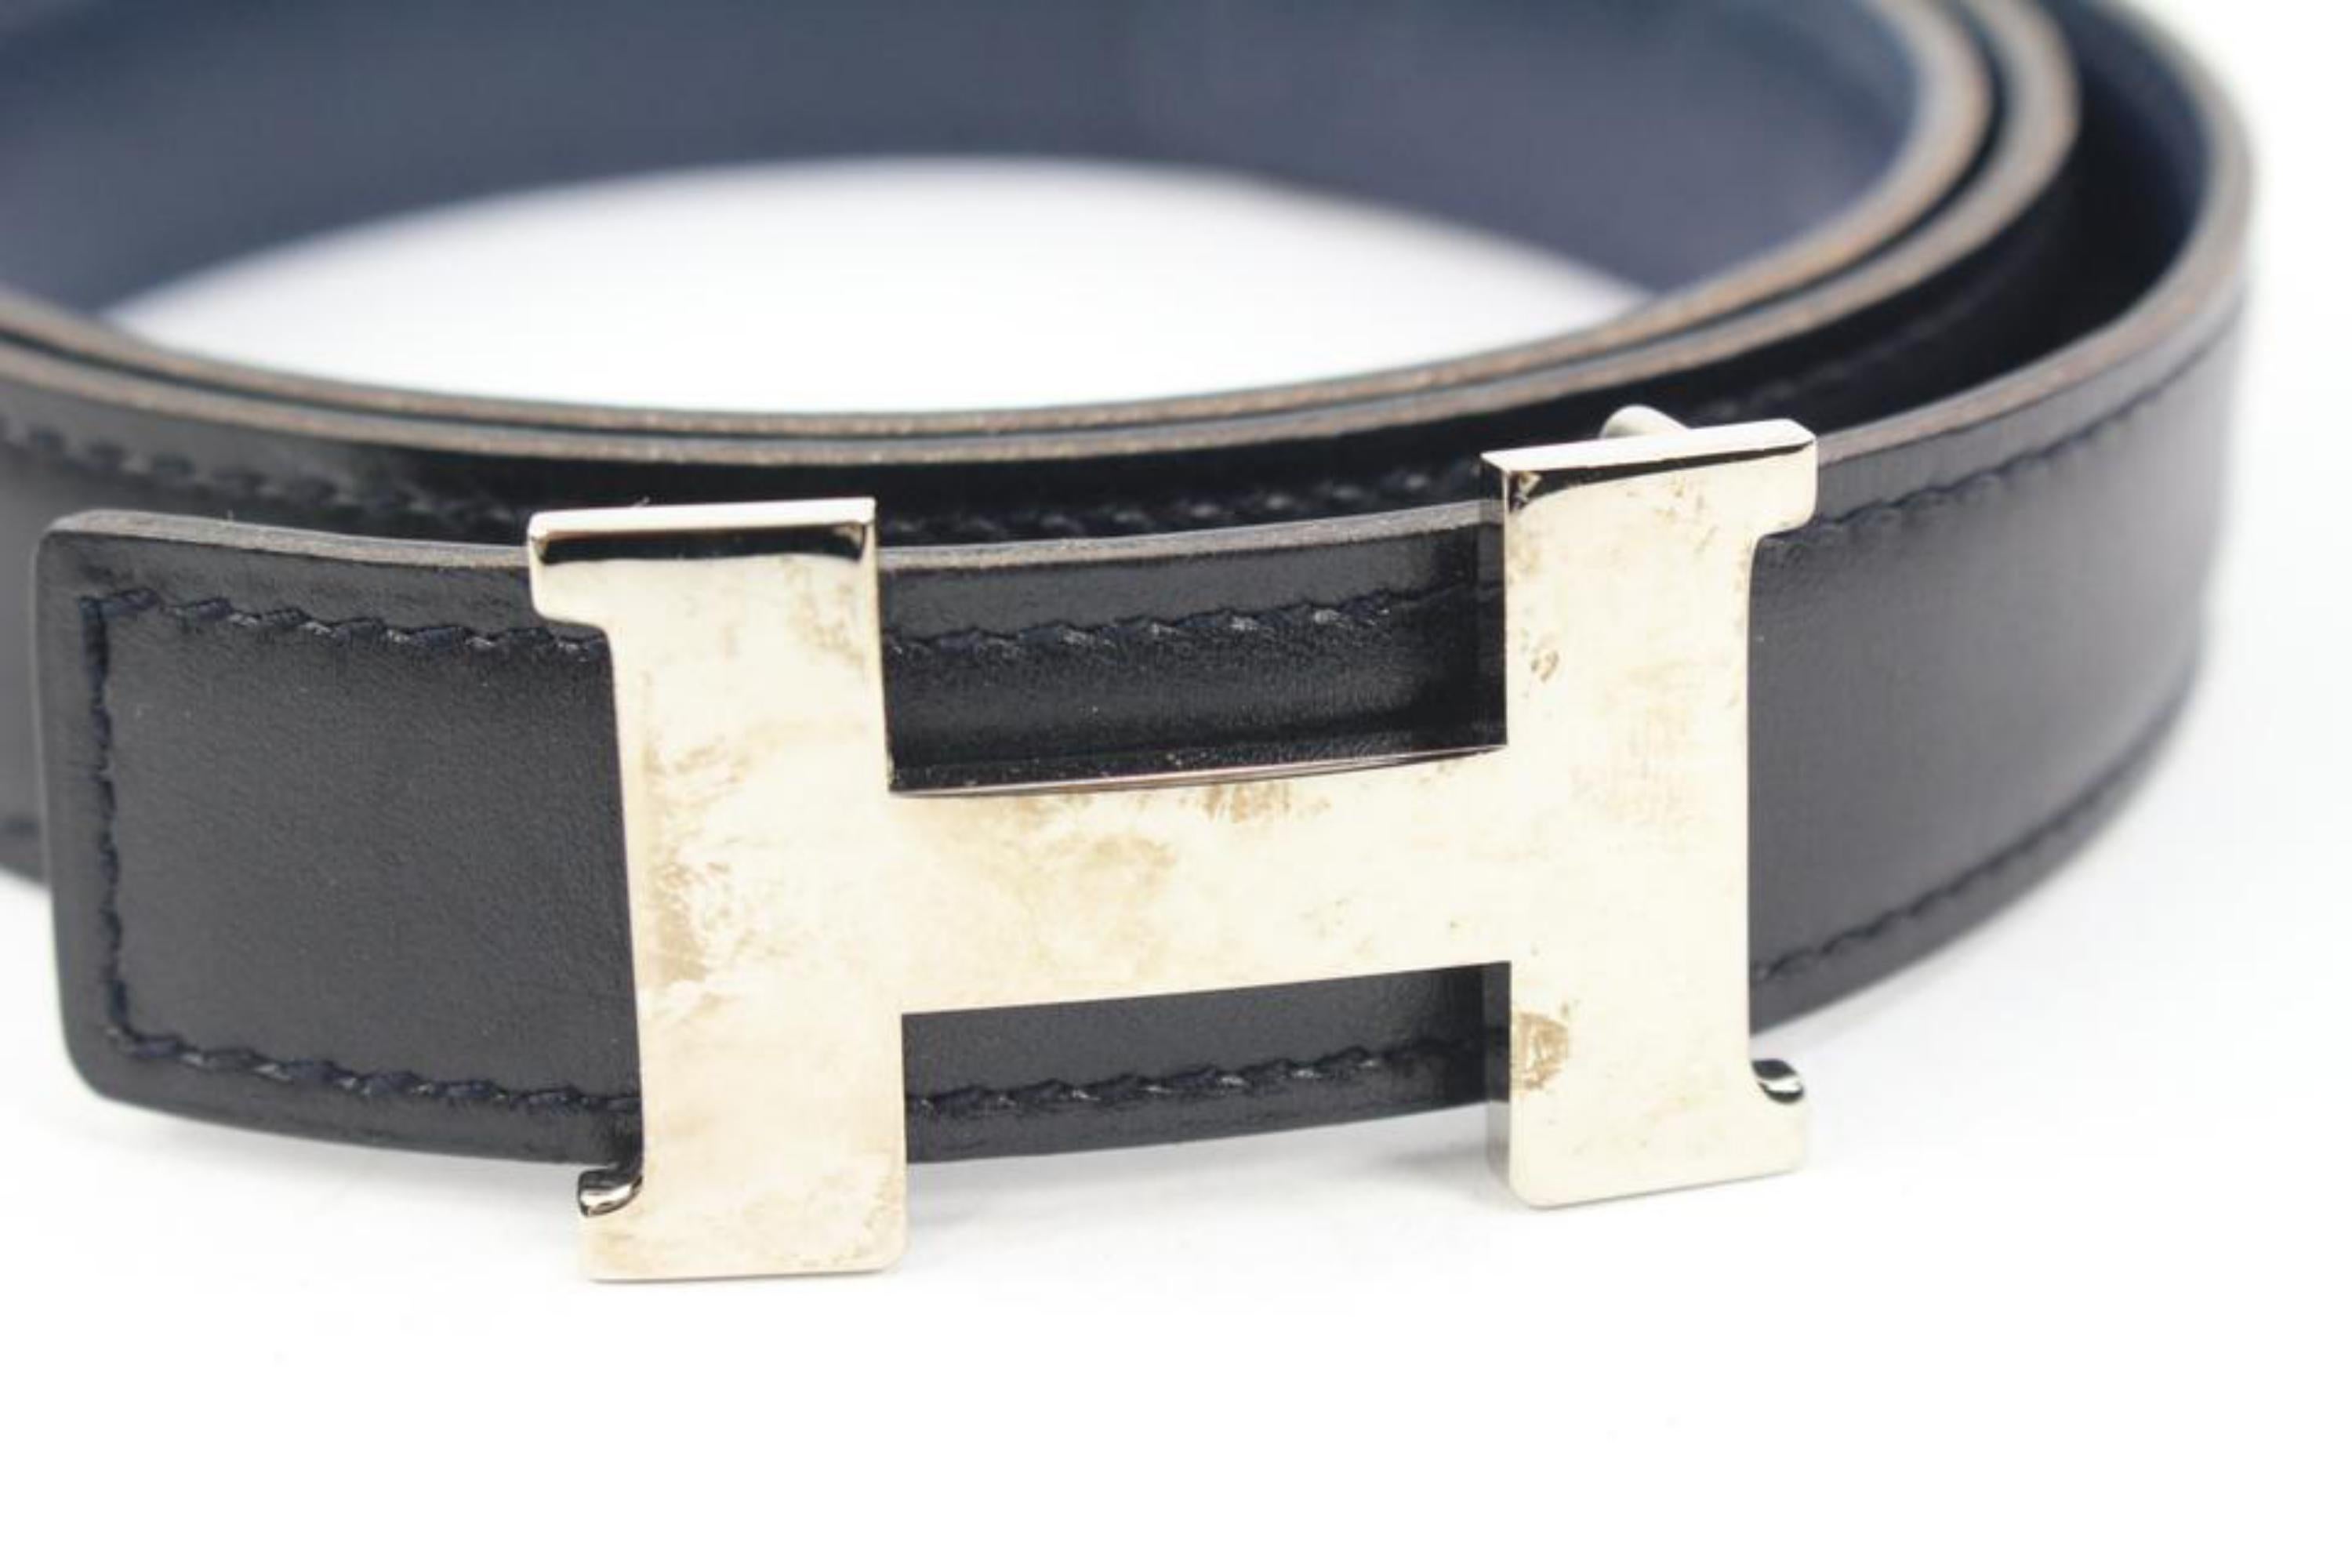 Hermès Black x Navy 24mm Reversible H Logo Belt Kit 121h60 In Excellent Condition For Sale In Dix hills, NY